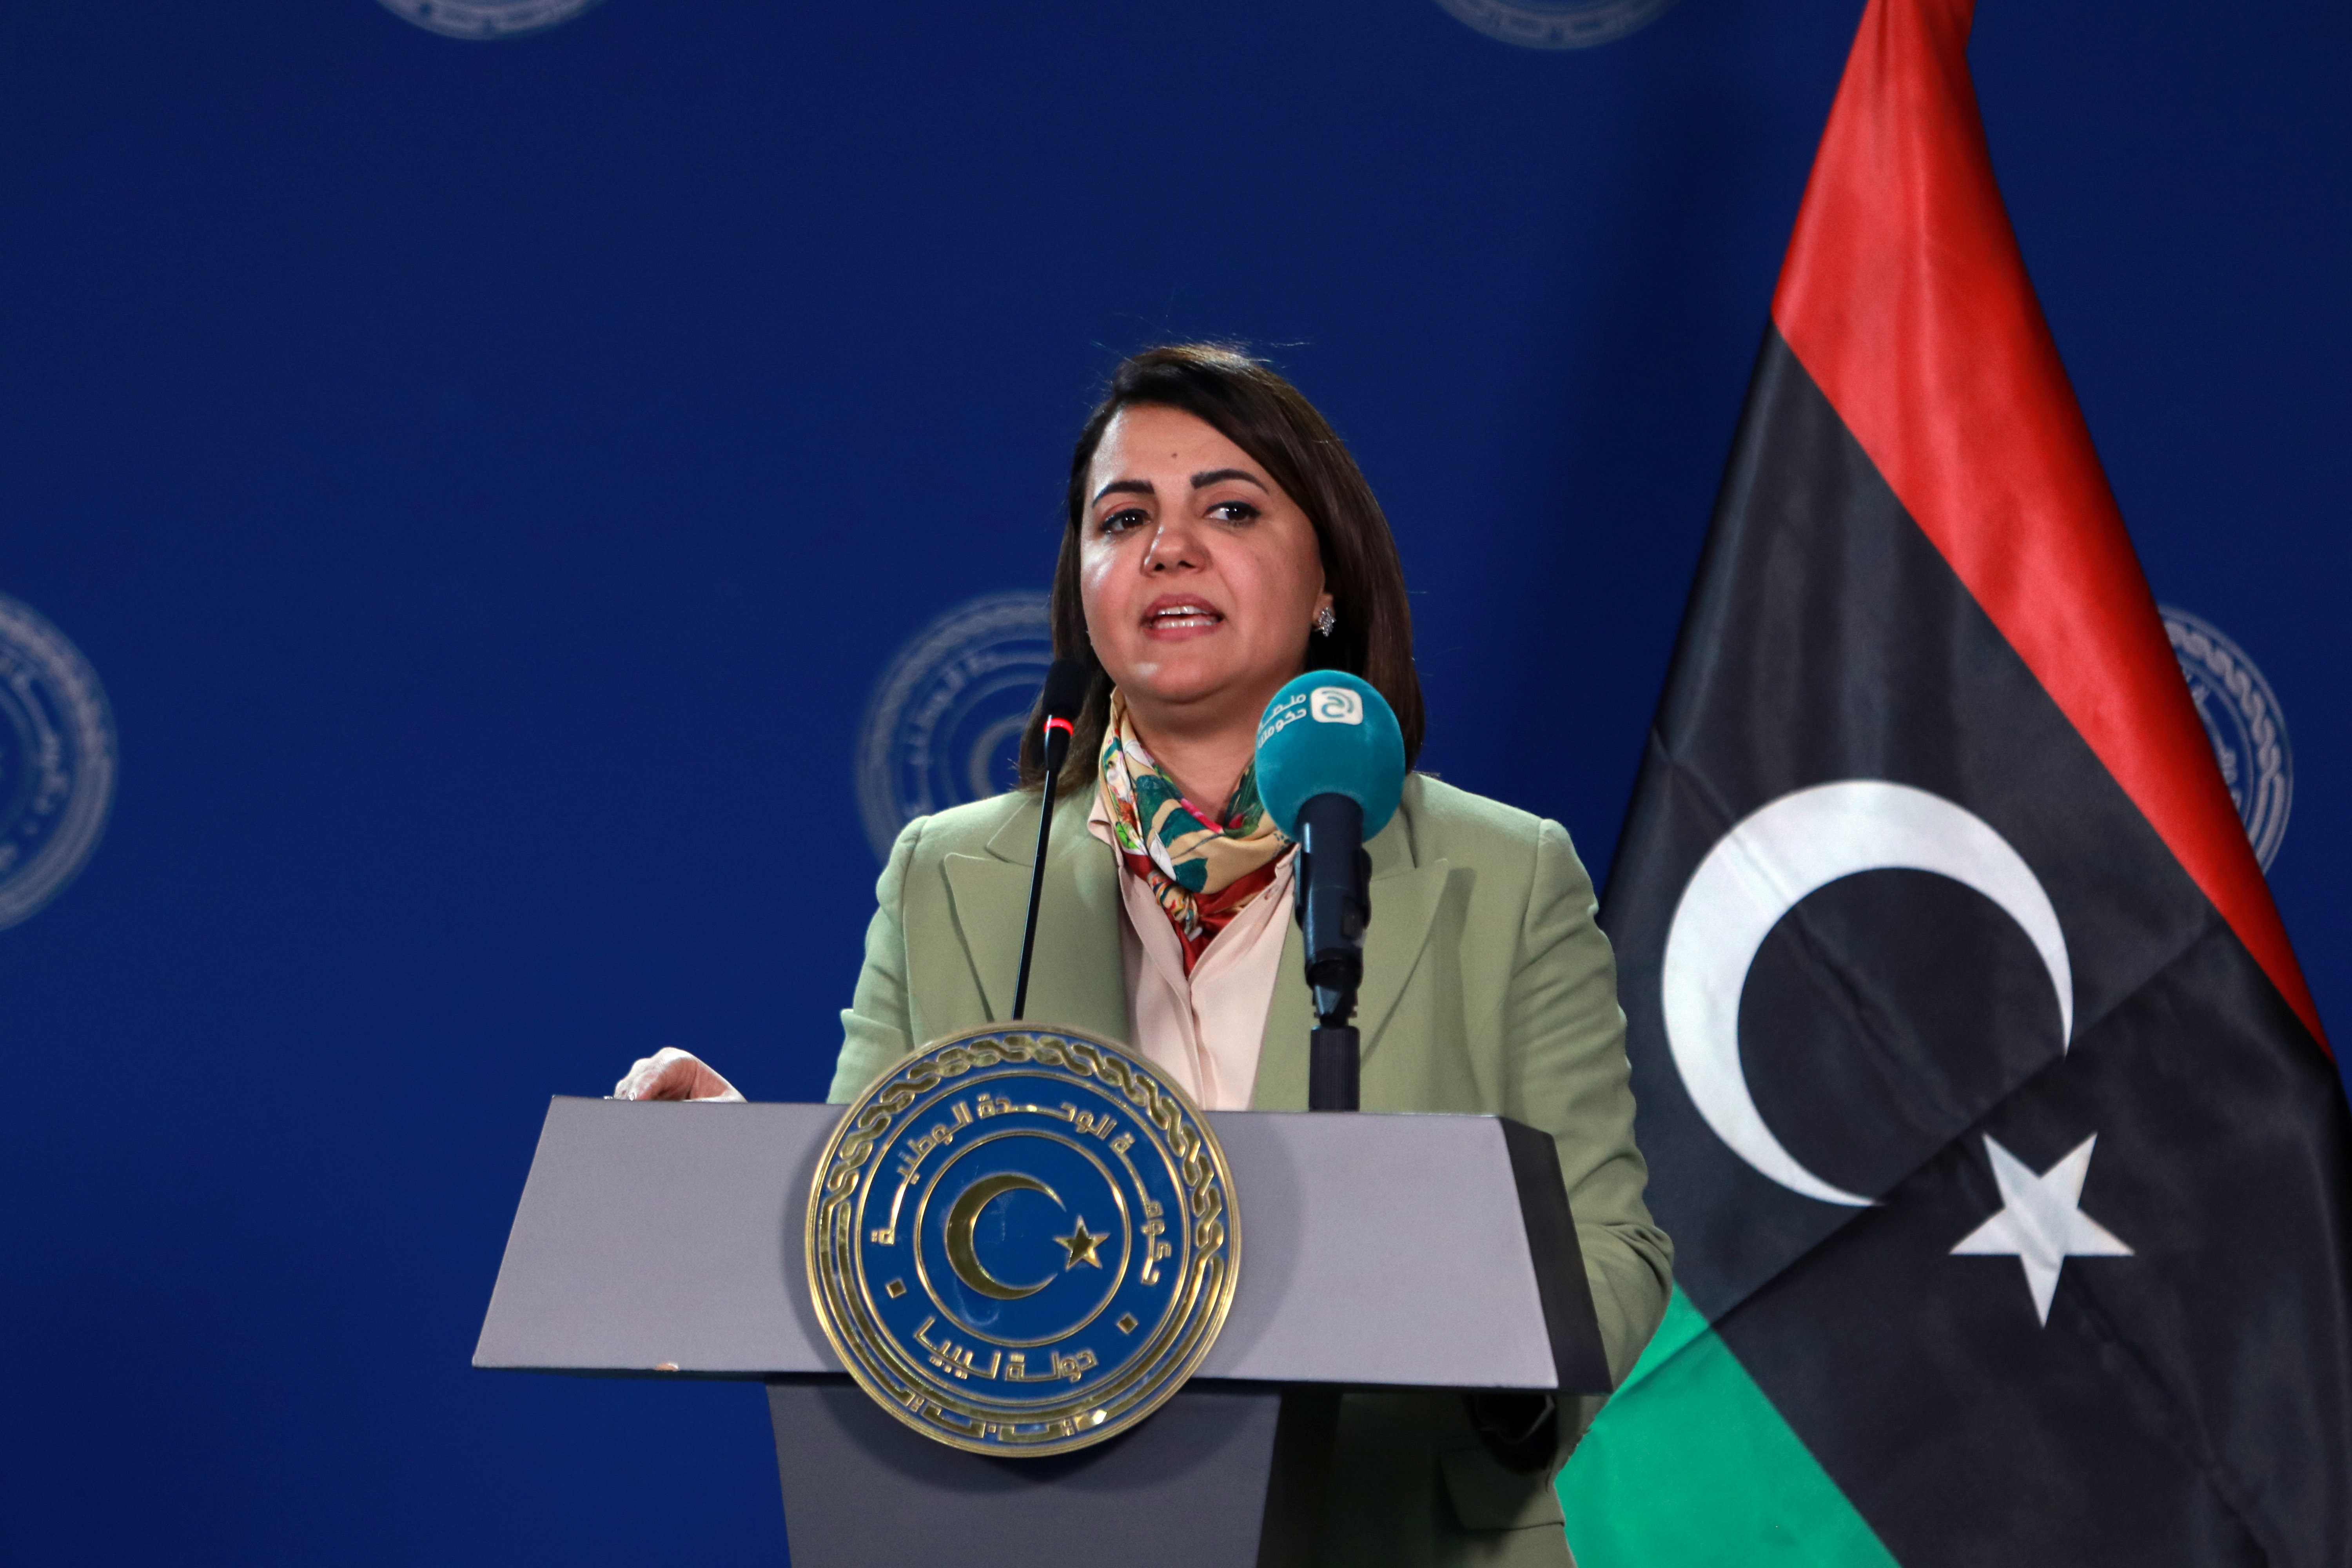 EU's head of foreign policy Josep Borell and Libyan FM Najla el-Mangoush hold a news conference in Tripoli